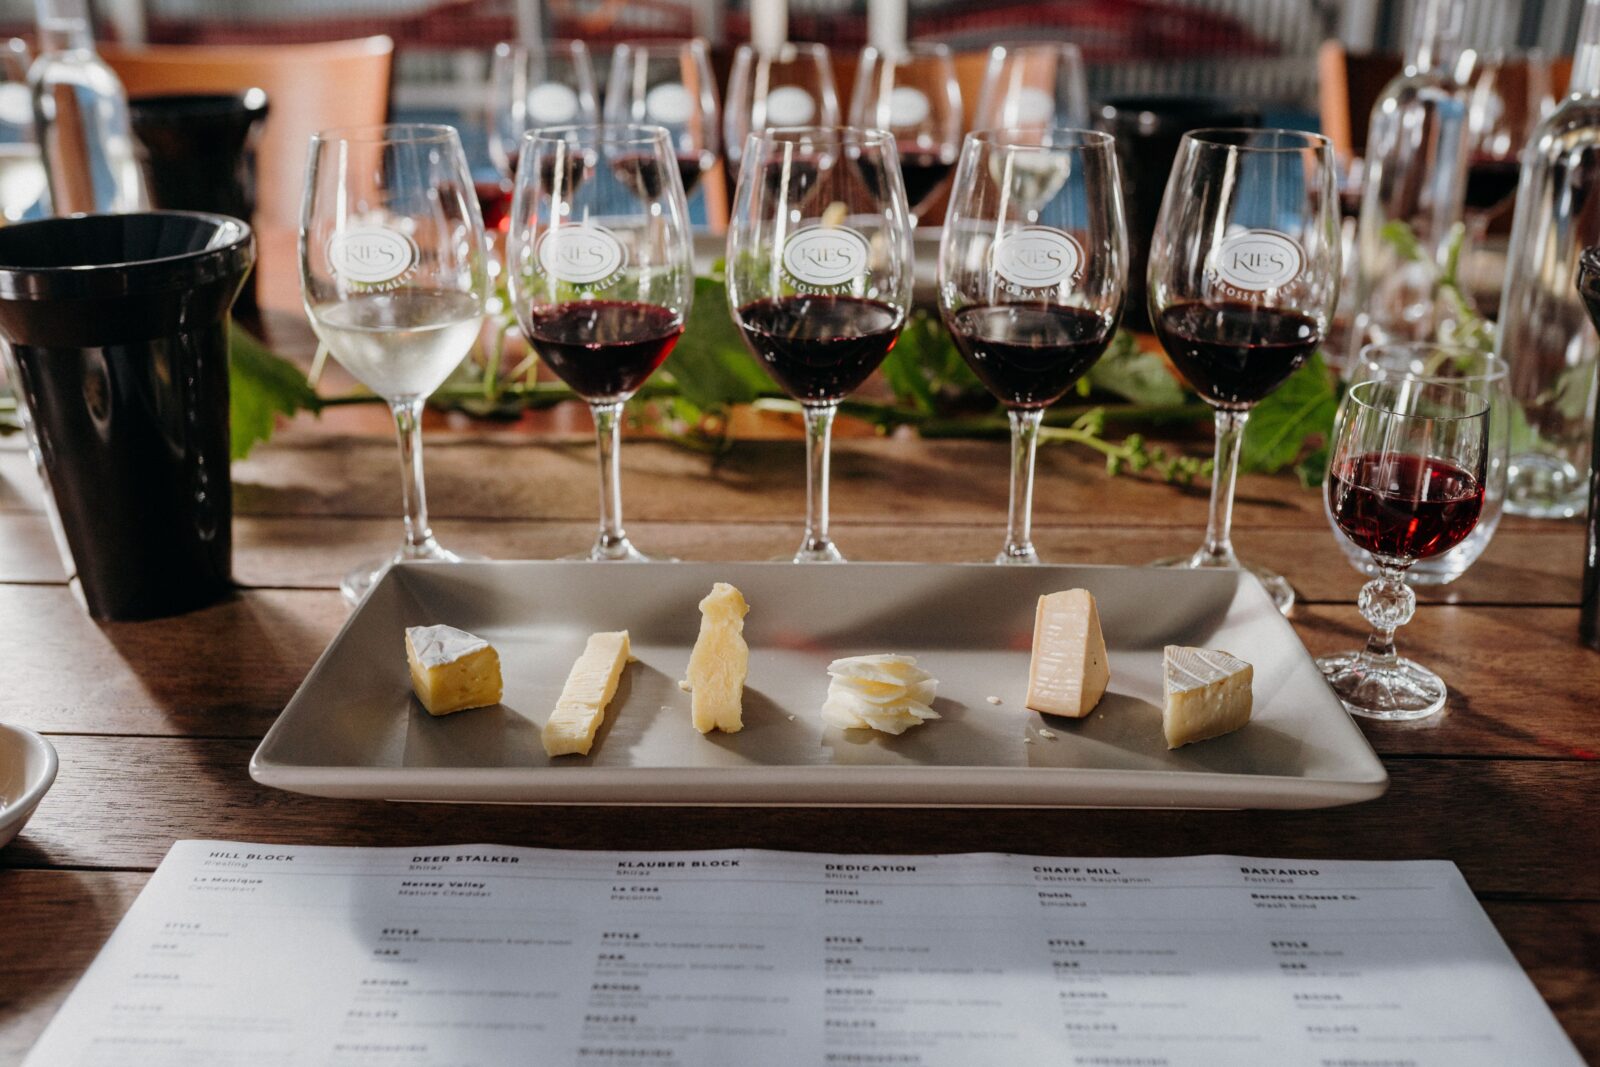 Wine & Cheese Pairing to celebrate the launch of the Monkey Nut Tree Merlot